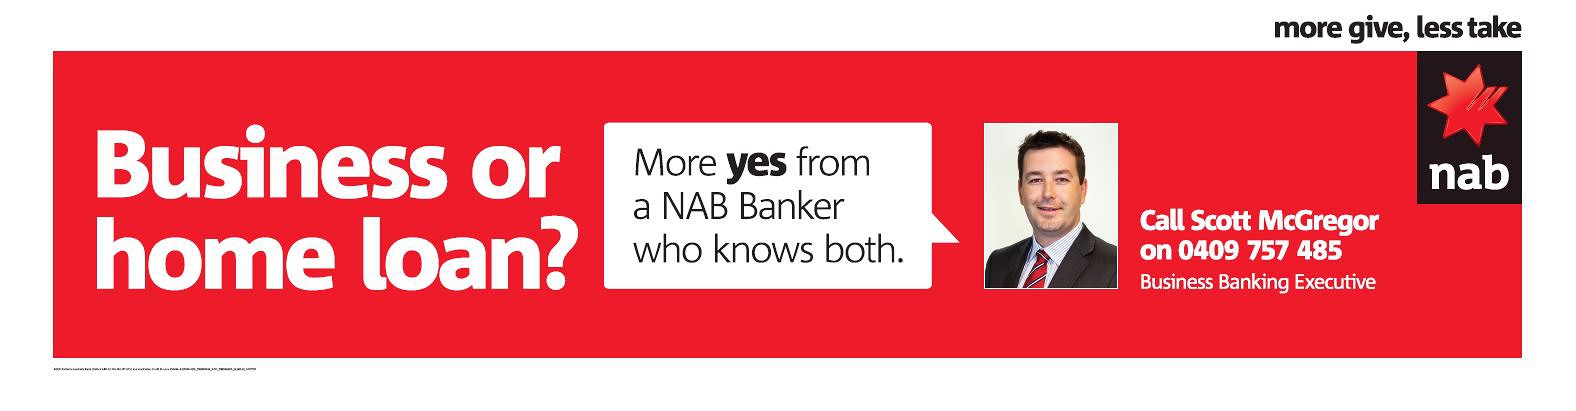 Image of NAB Business or Homeloan Campaign